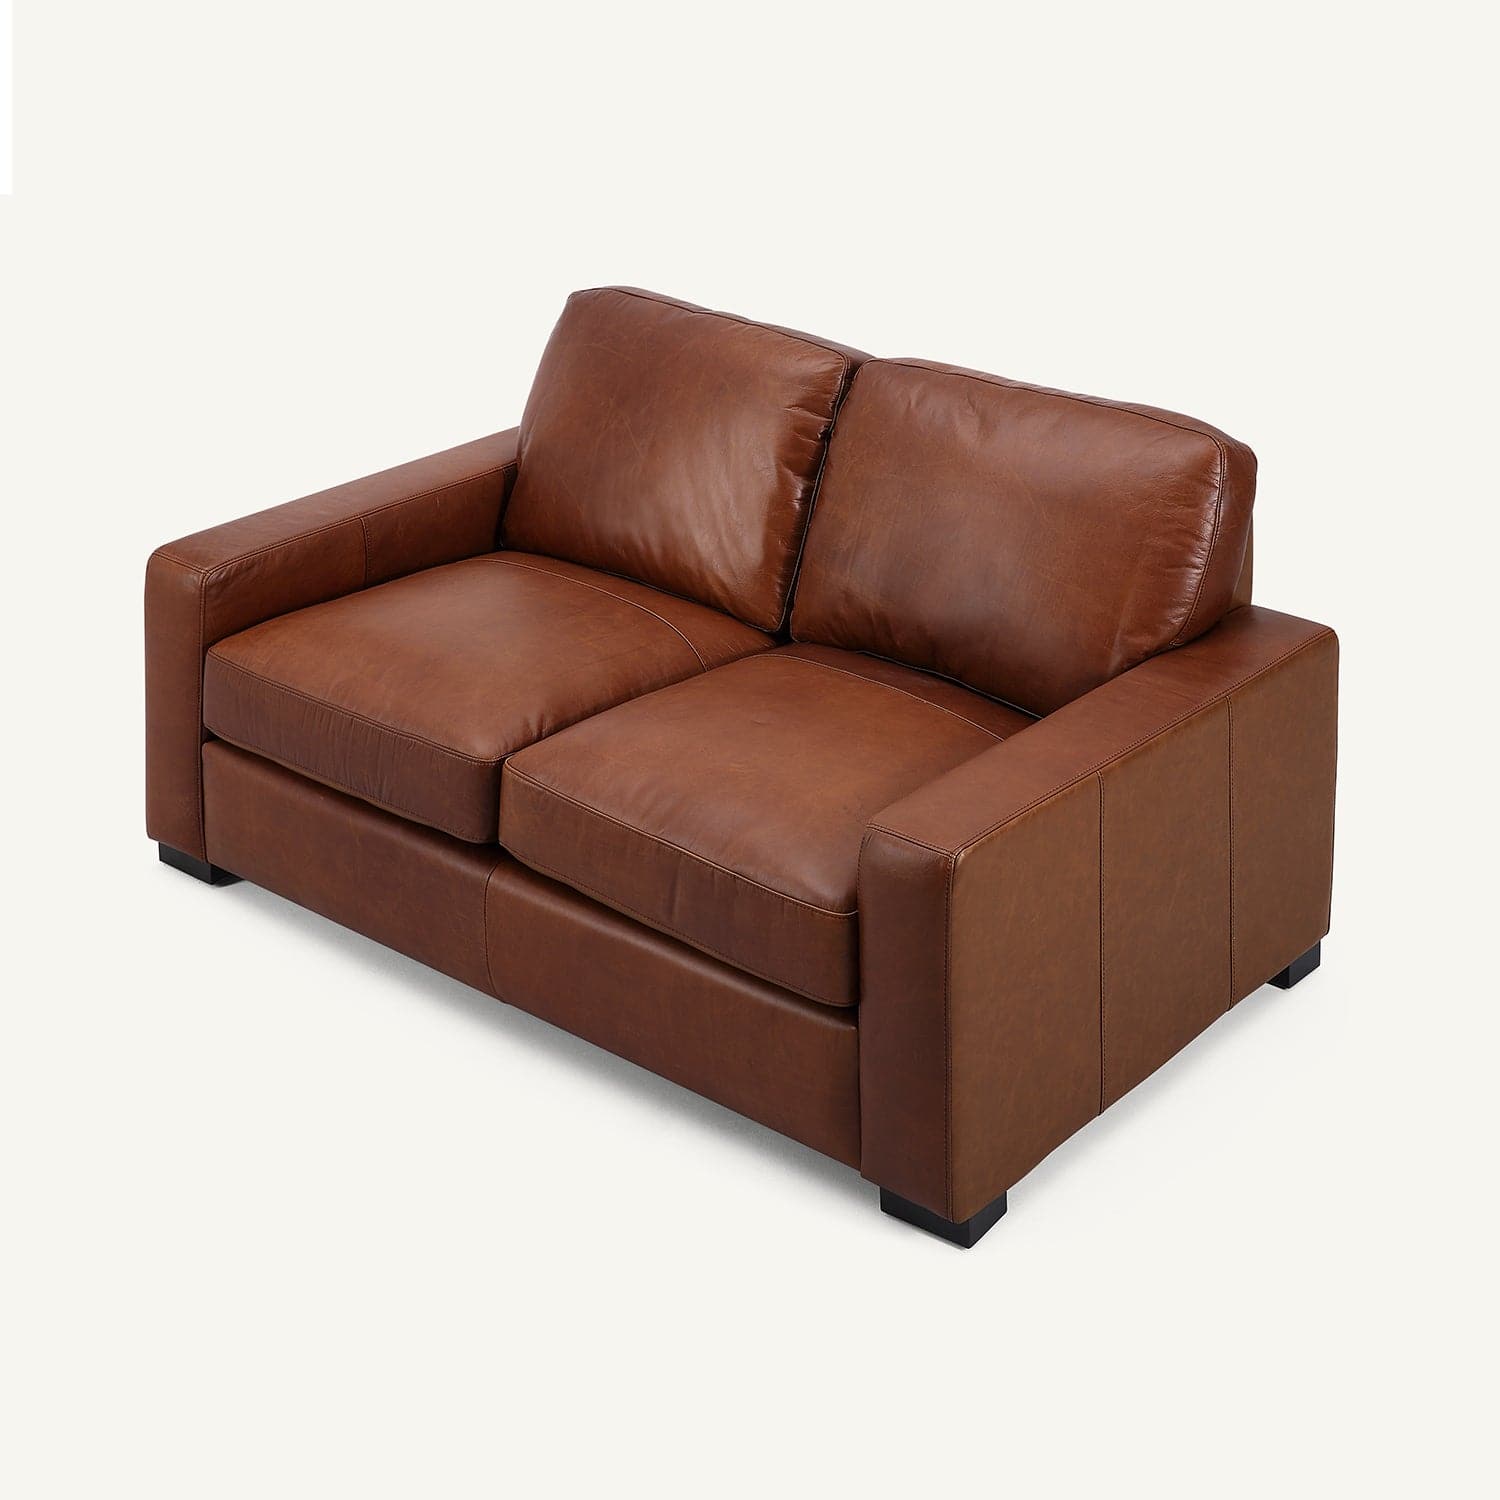 Randall Chestnut Brown Oil Wax Leather Loveseat